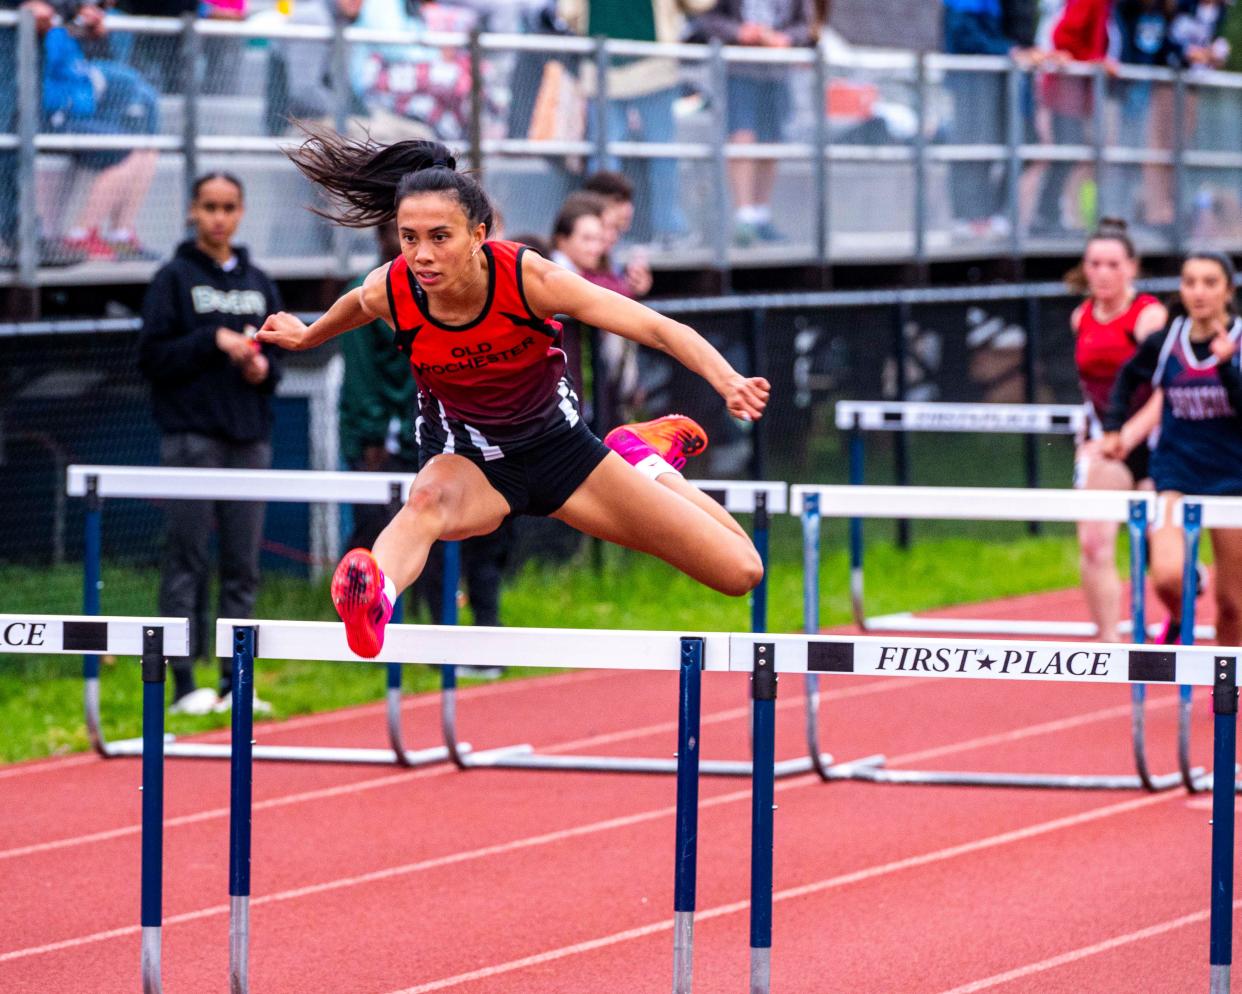 Old Rochester's Maggie Brogioli took second in the 100 hurdles at the SCC Championship.